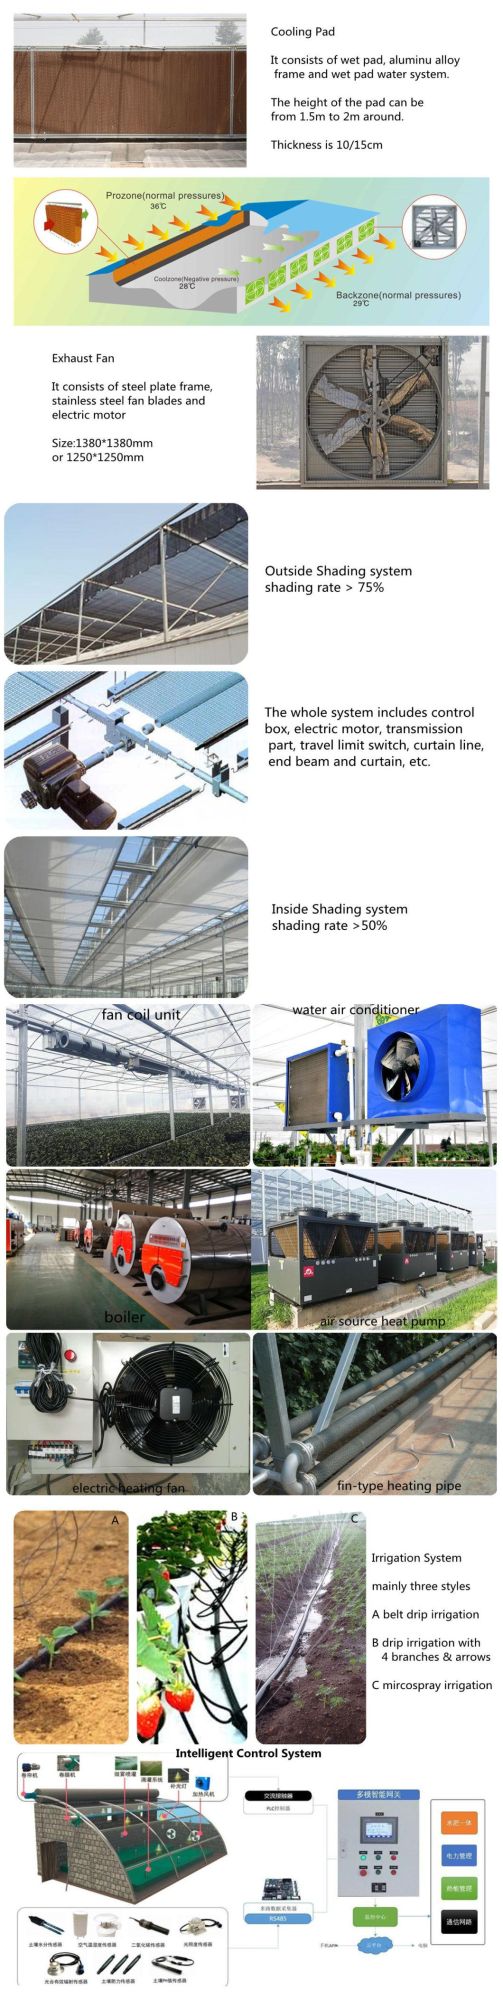 Good Quality Seedling Machine with Watering Station and Air Compressor for Seedling Tray Seeds Sowing for Modern Farming